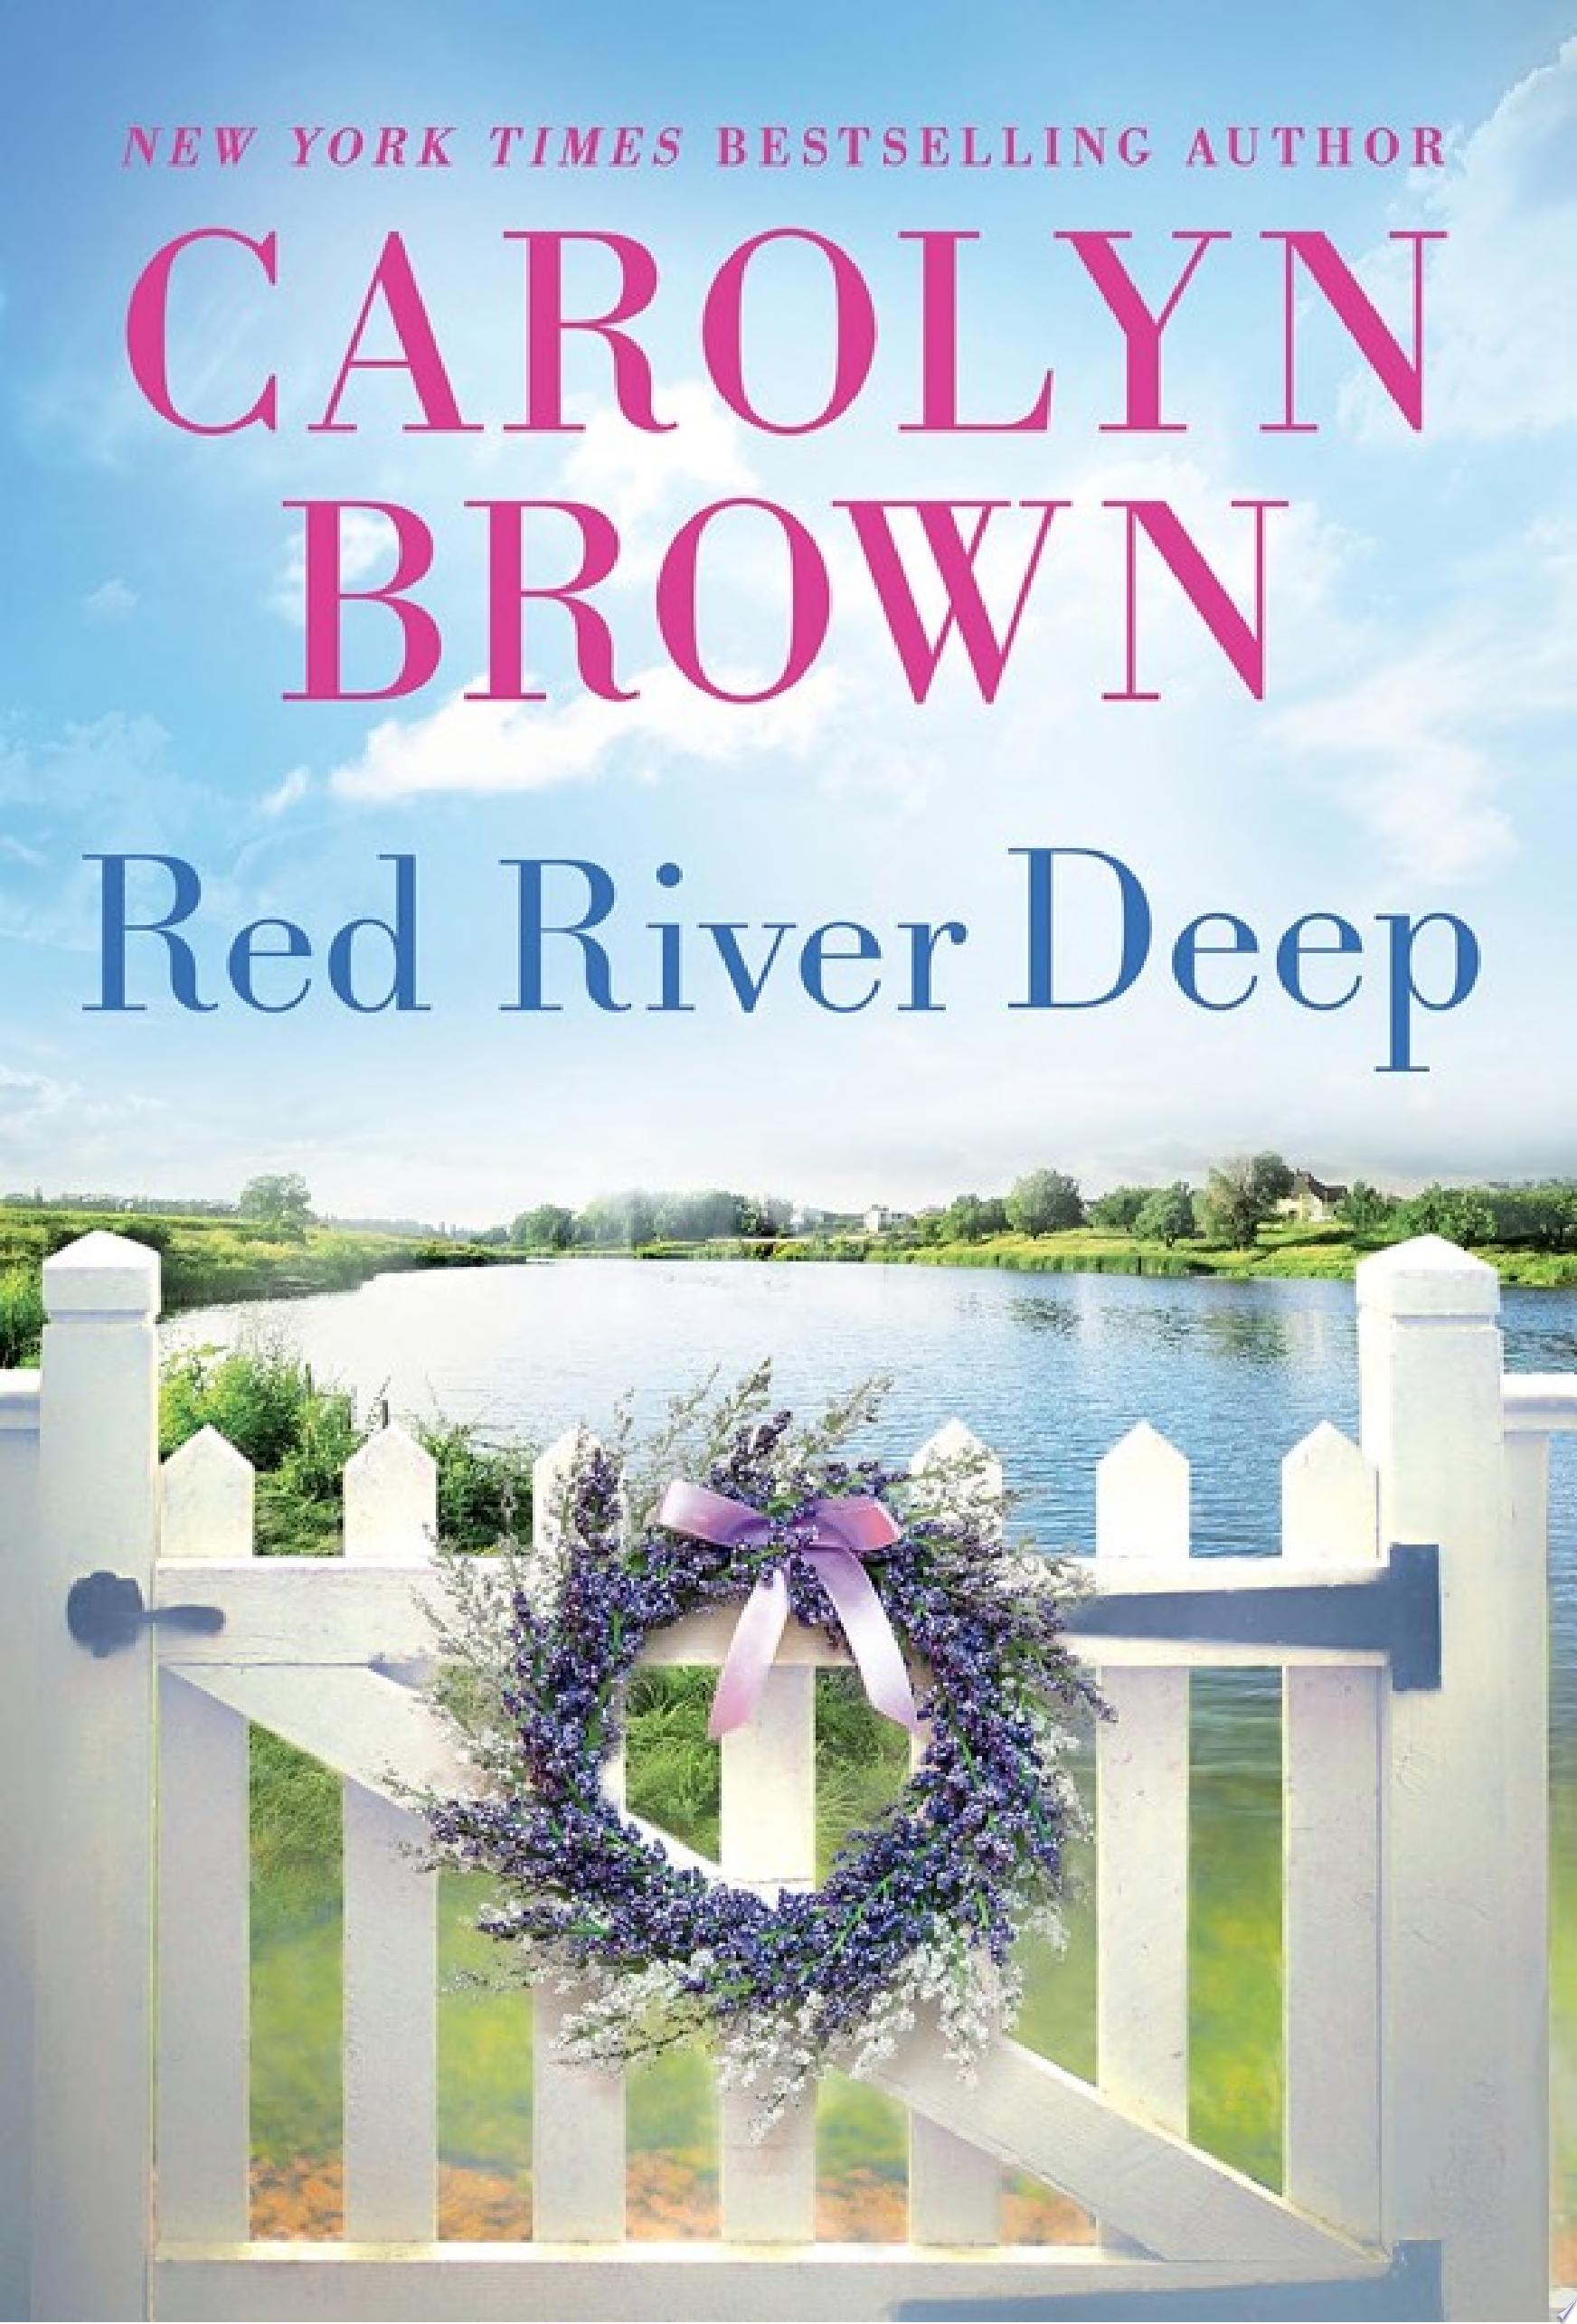 Image for "Red River Deep"